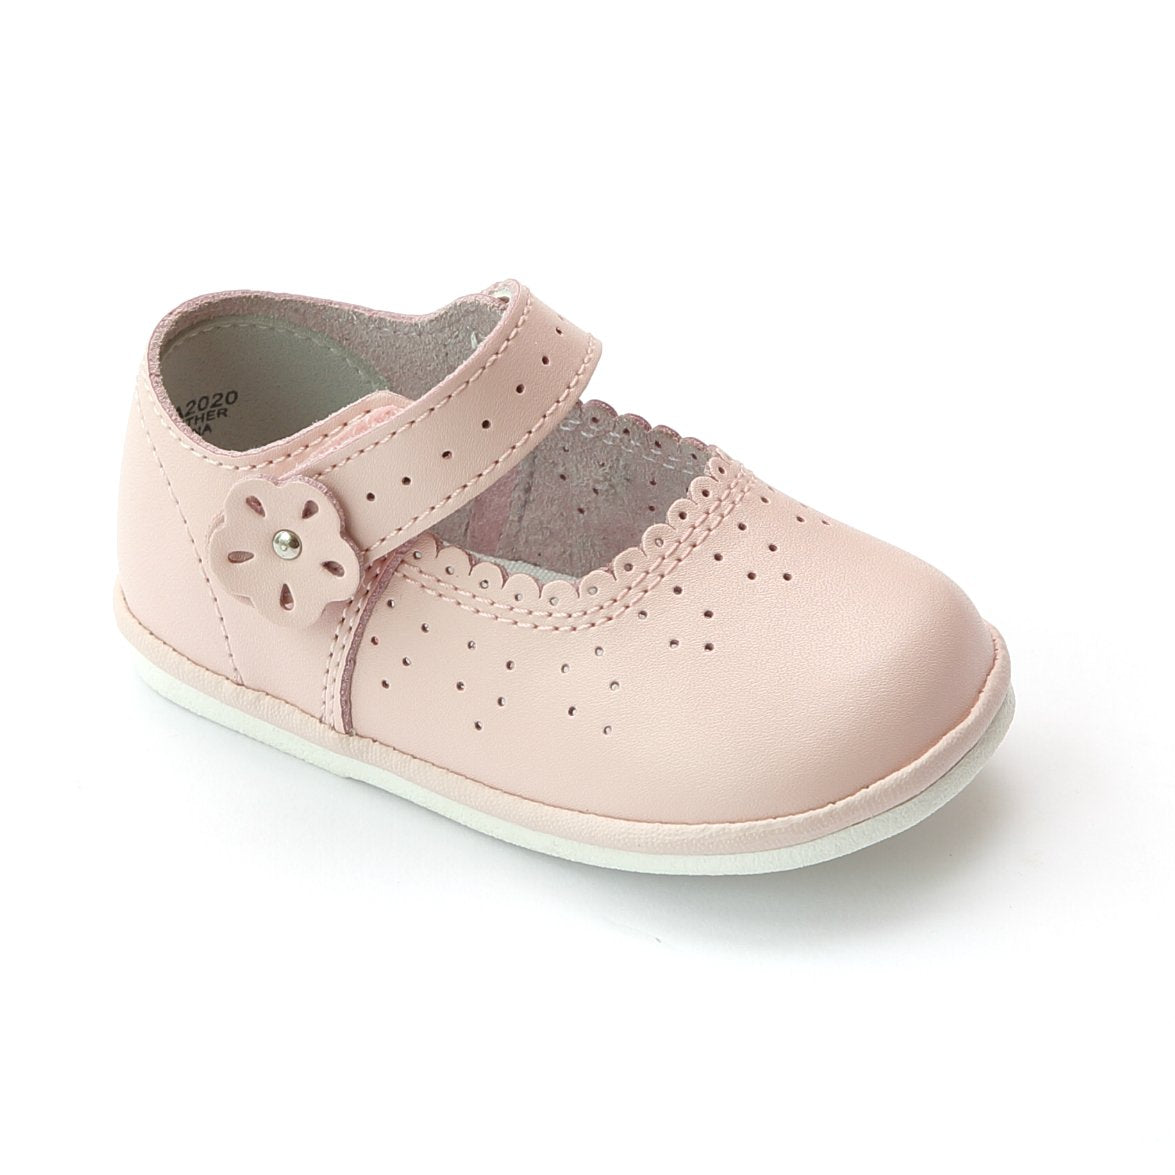 Angel Baby Shoes classic mary janes - The Original Childrens Shop